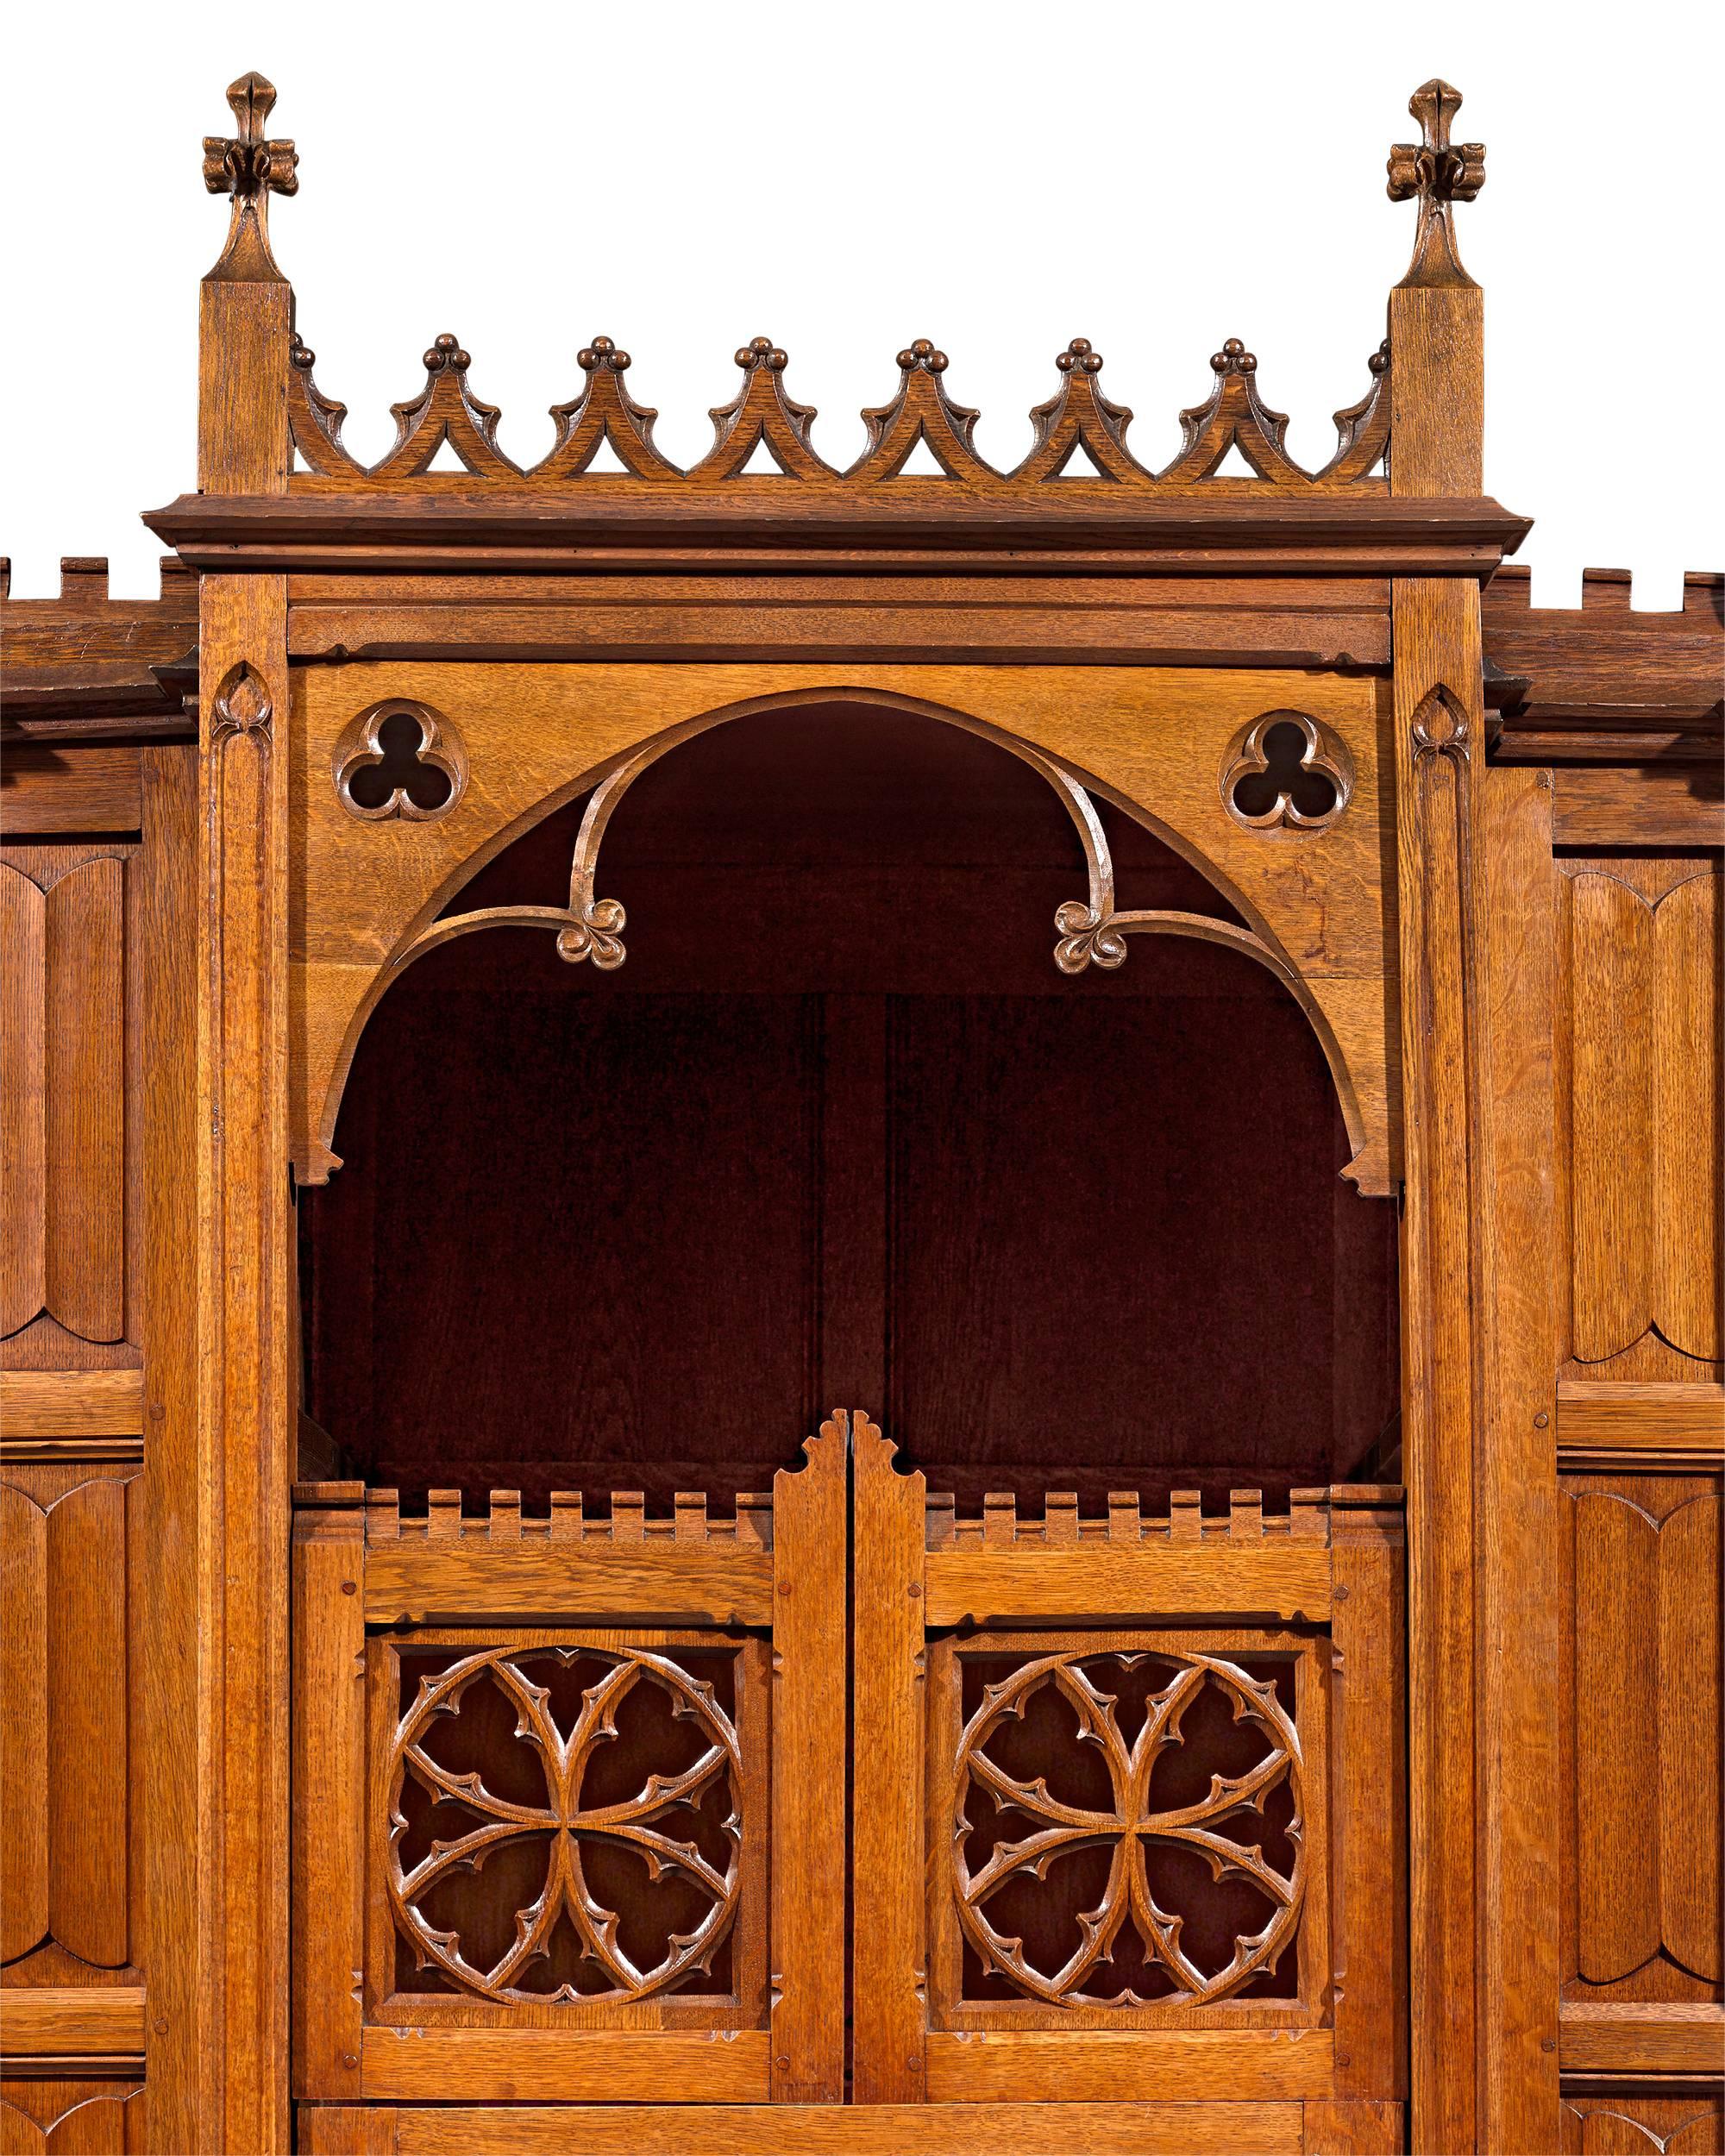 Other 19th Century Confessional